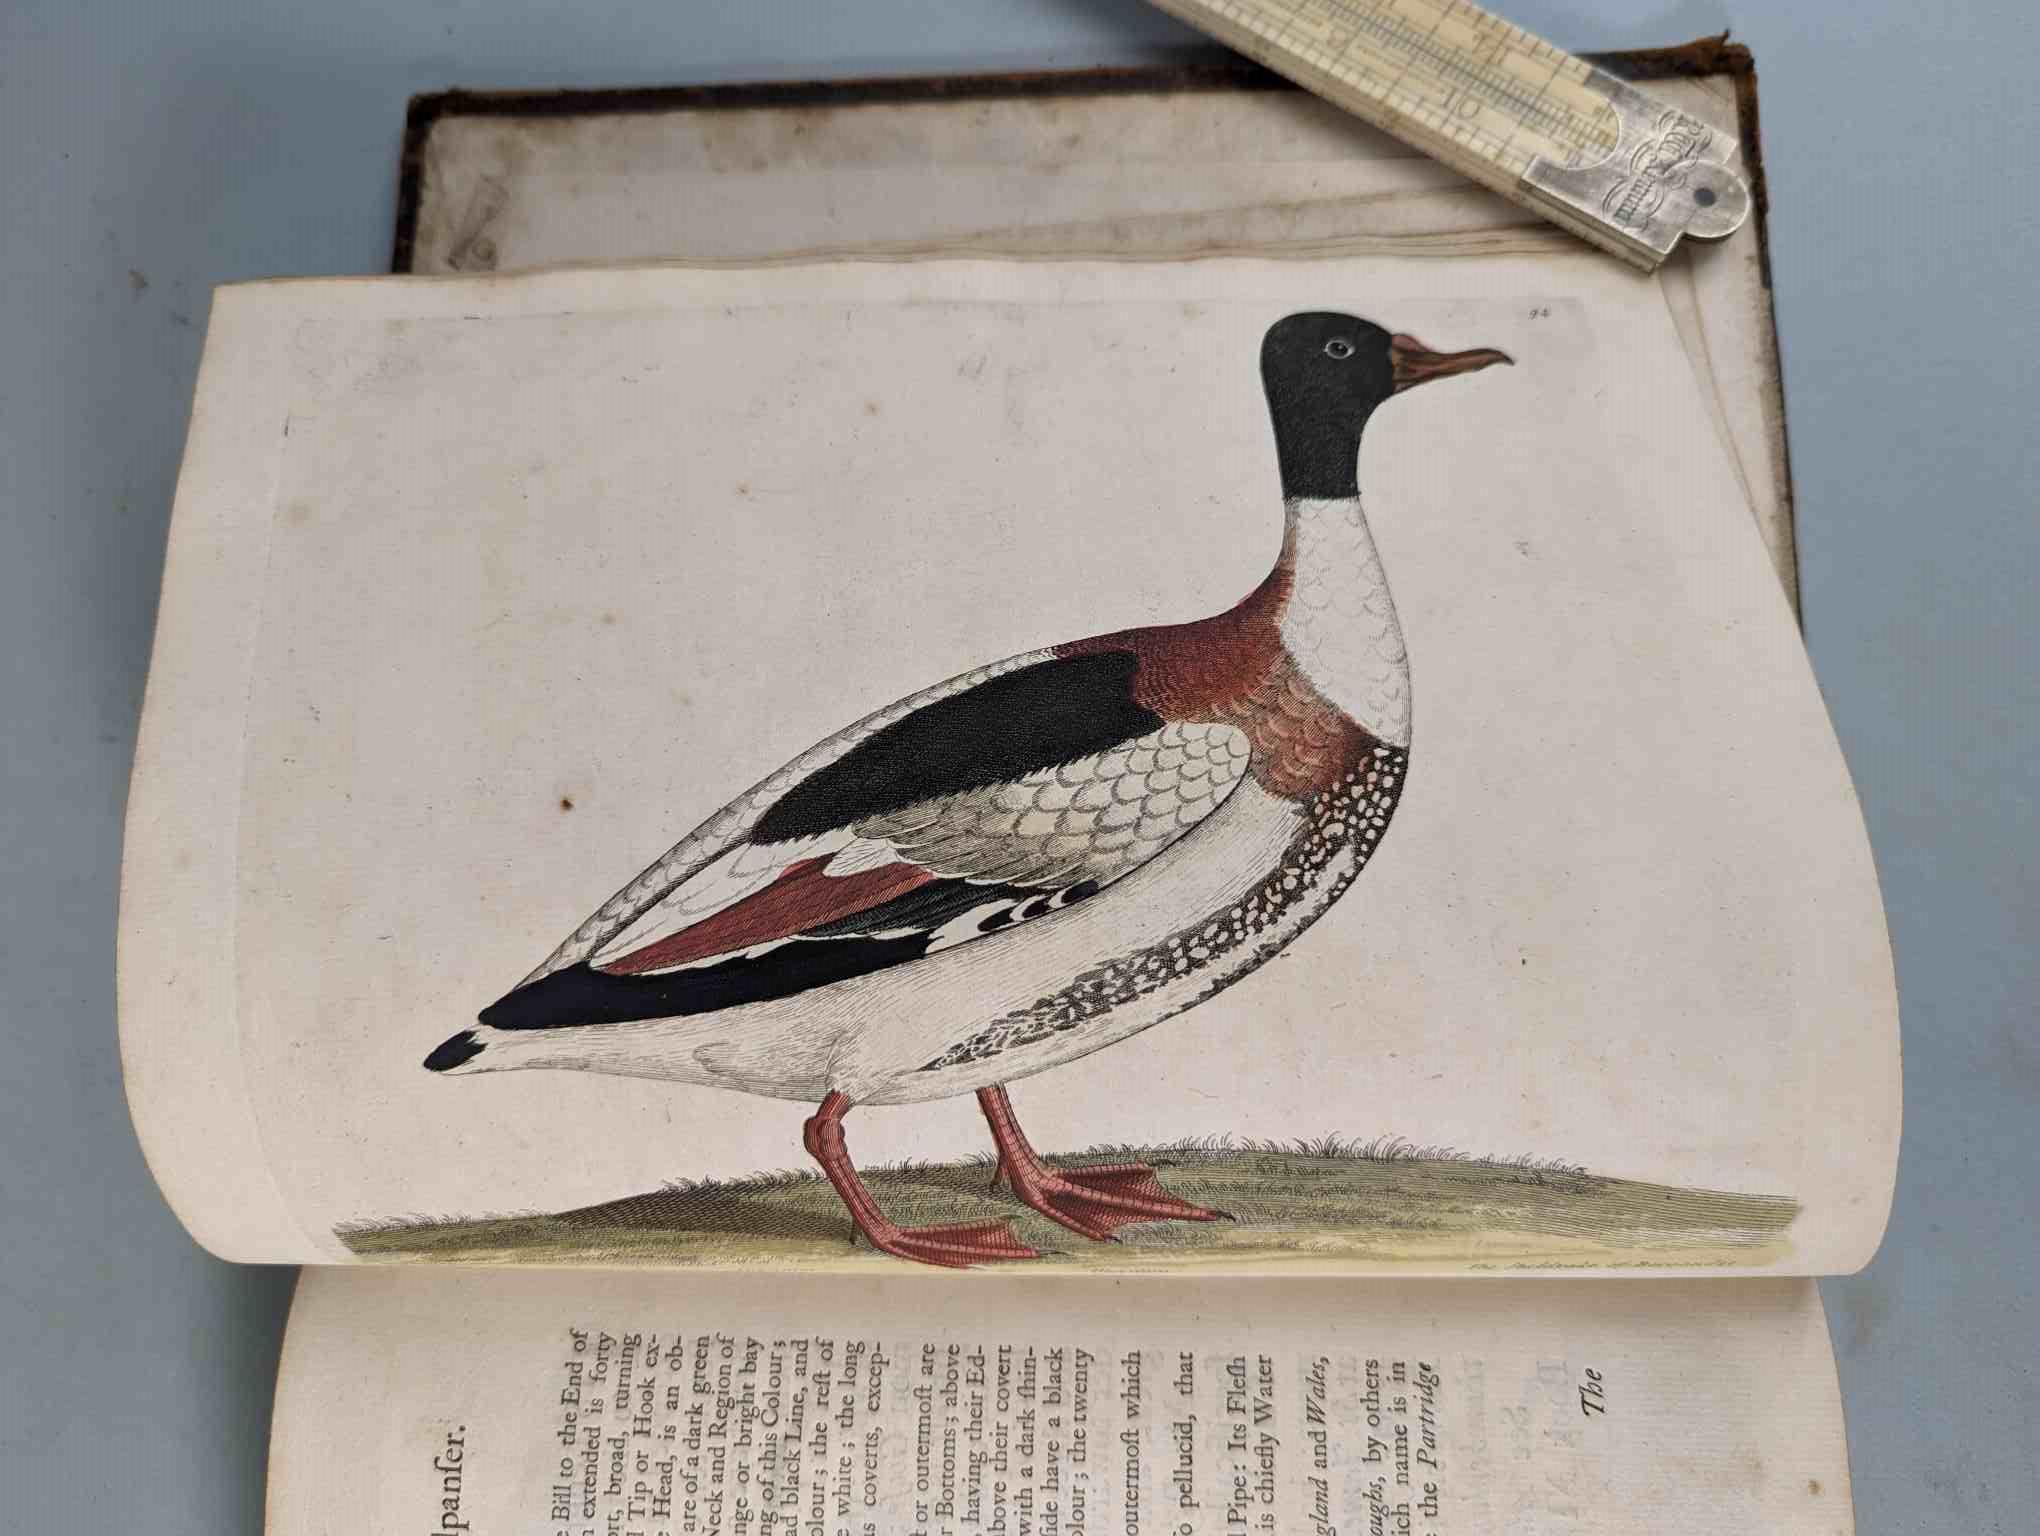 ALBIN, Eleazar. A Natural History of Birds, to which are added, Notes and Observations by W. - Image 97 of 208